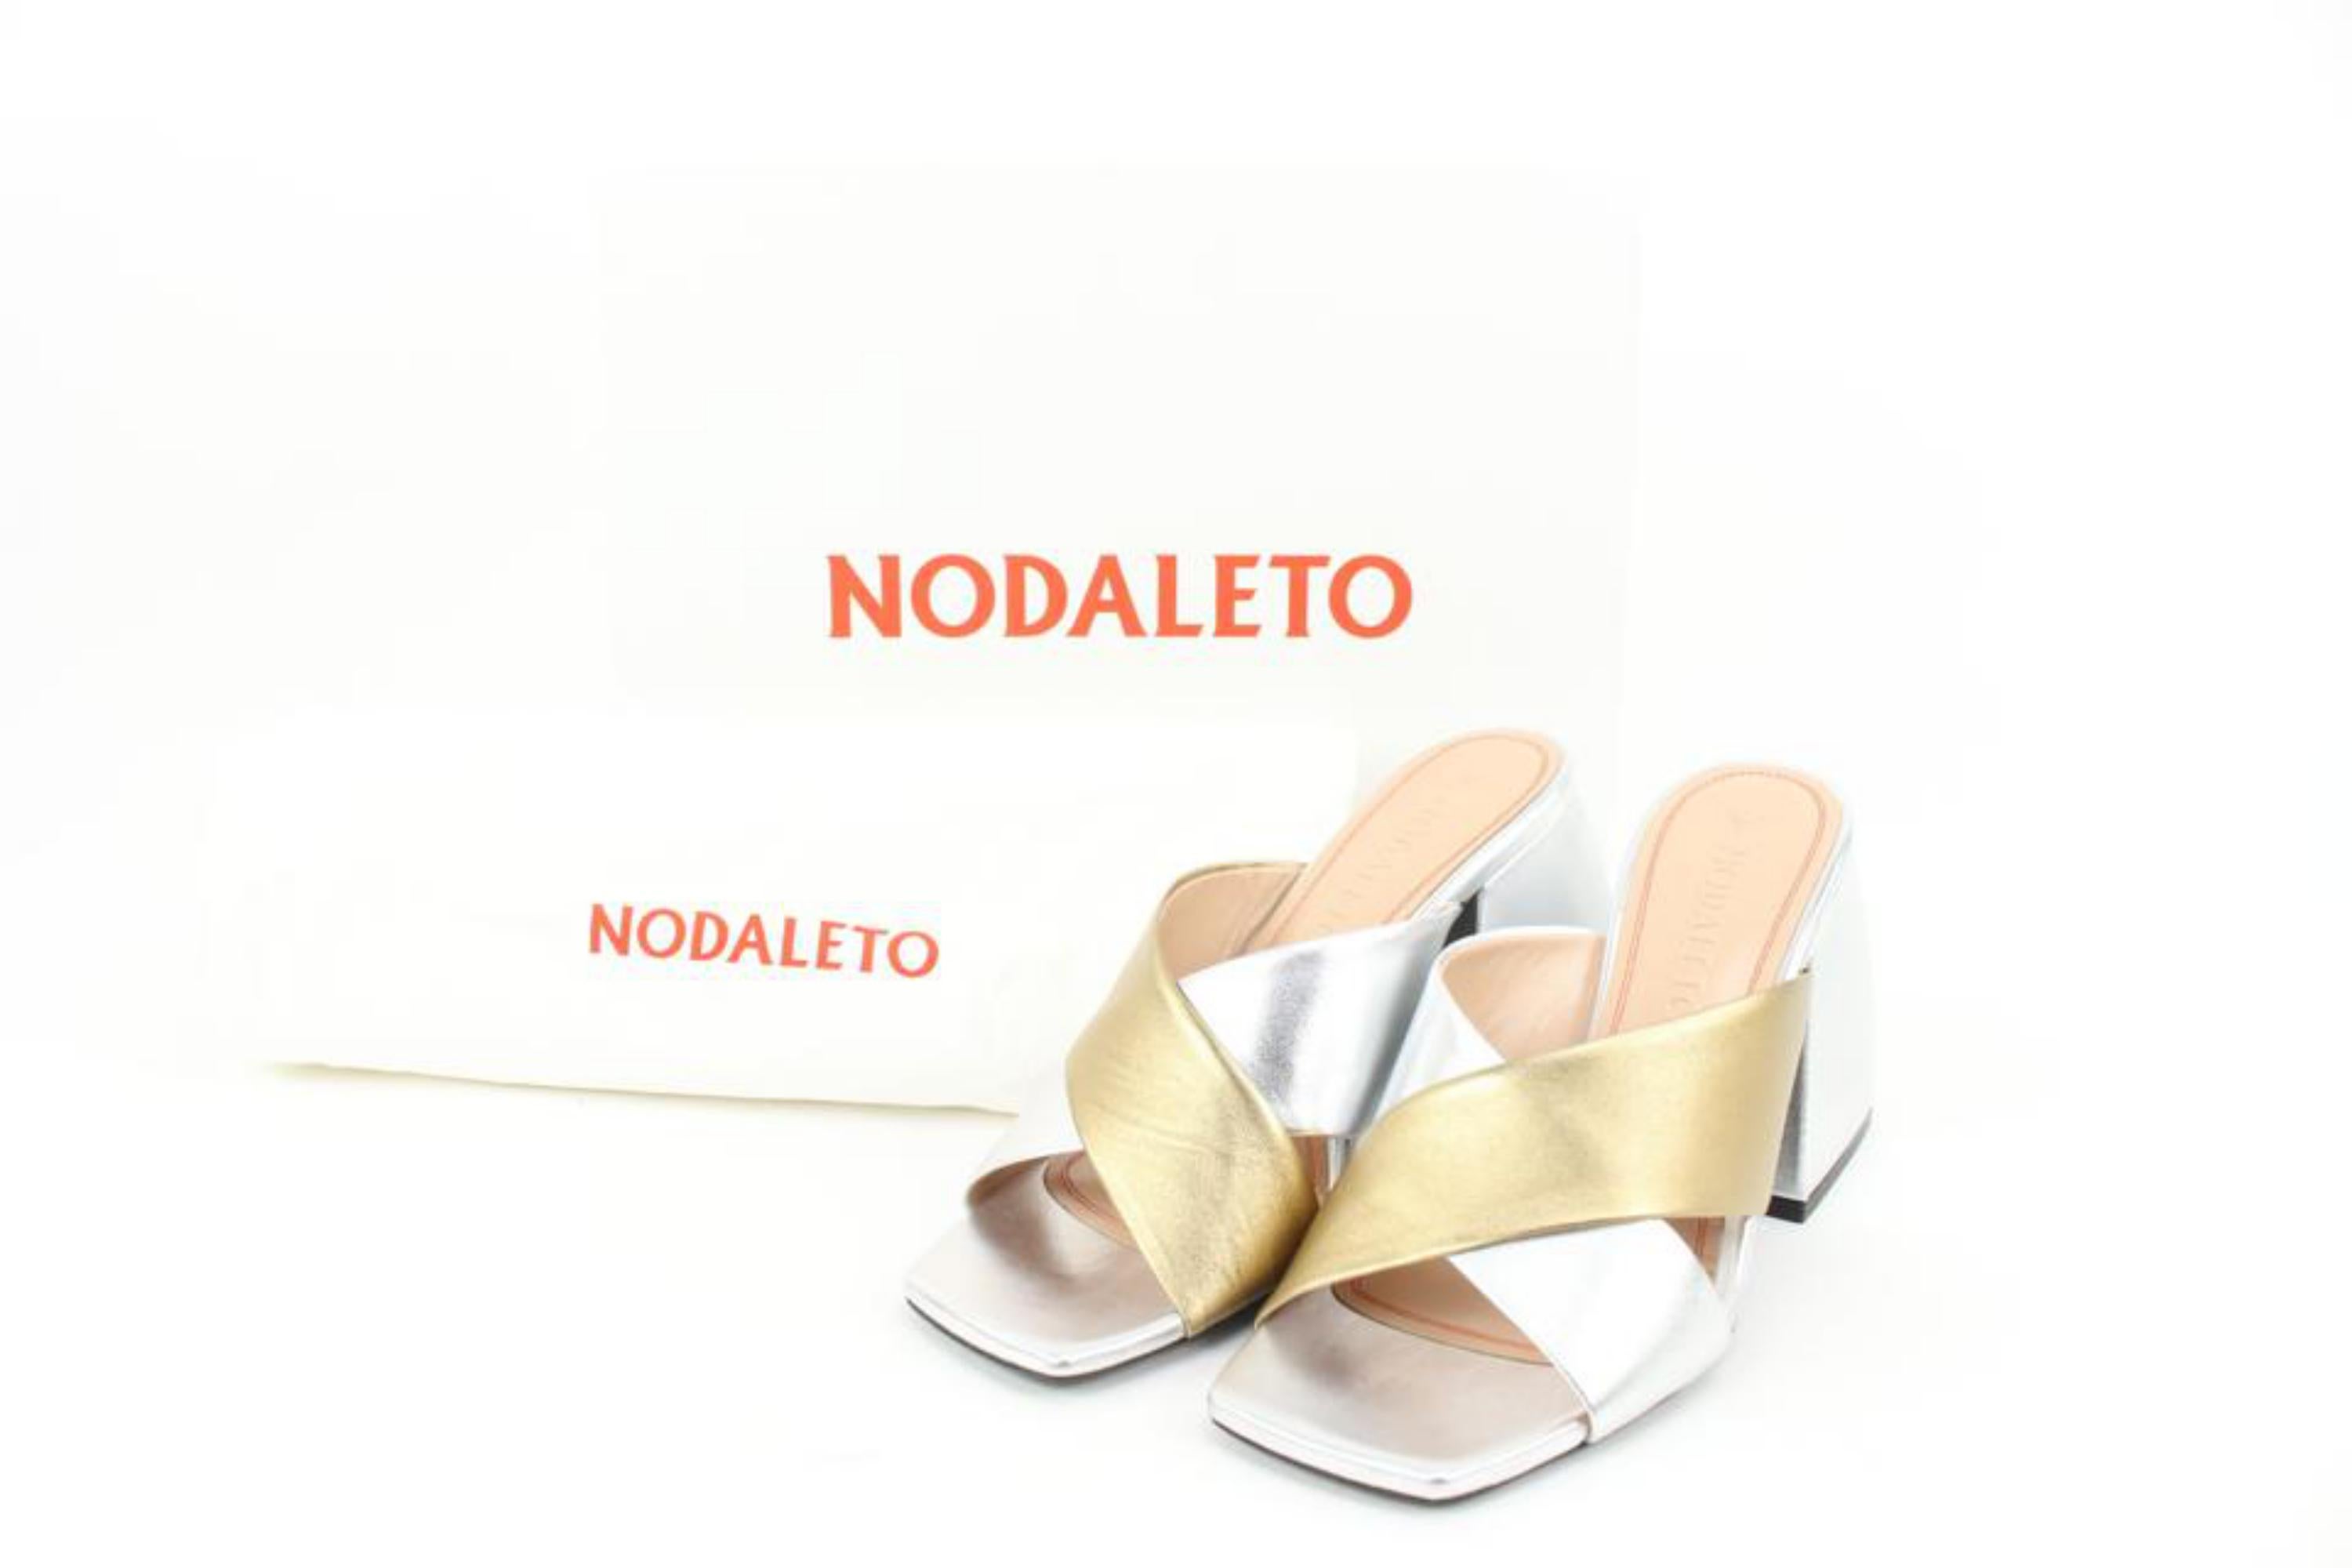 Nodaleto Size 39 Silver x Gold Leather Bulla Banks Block Heel Sandals 8no34s
Made In: Venice
Measurements: Length:  9.4